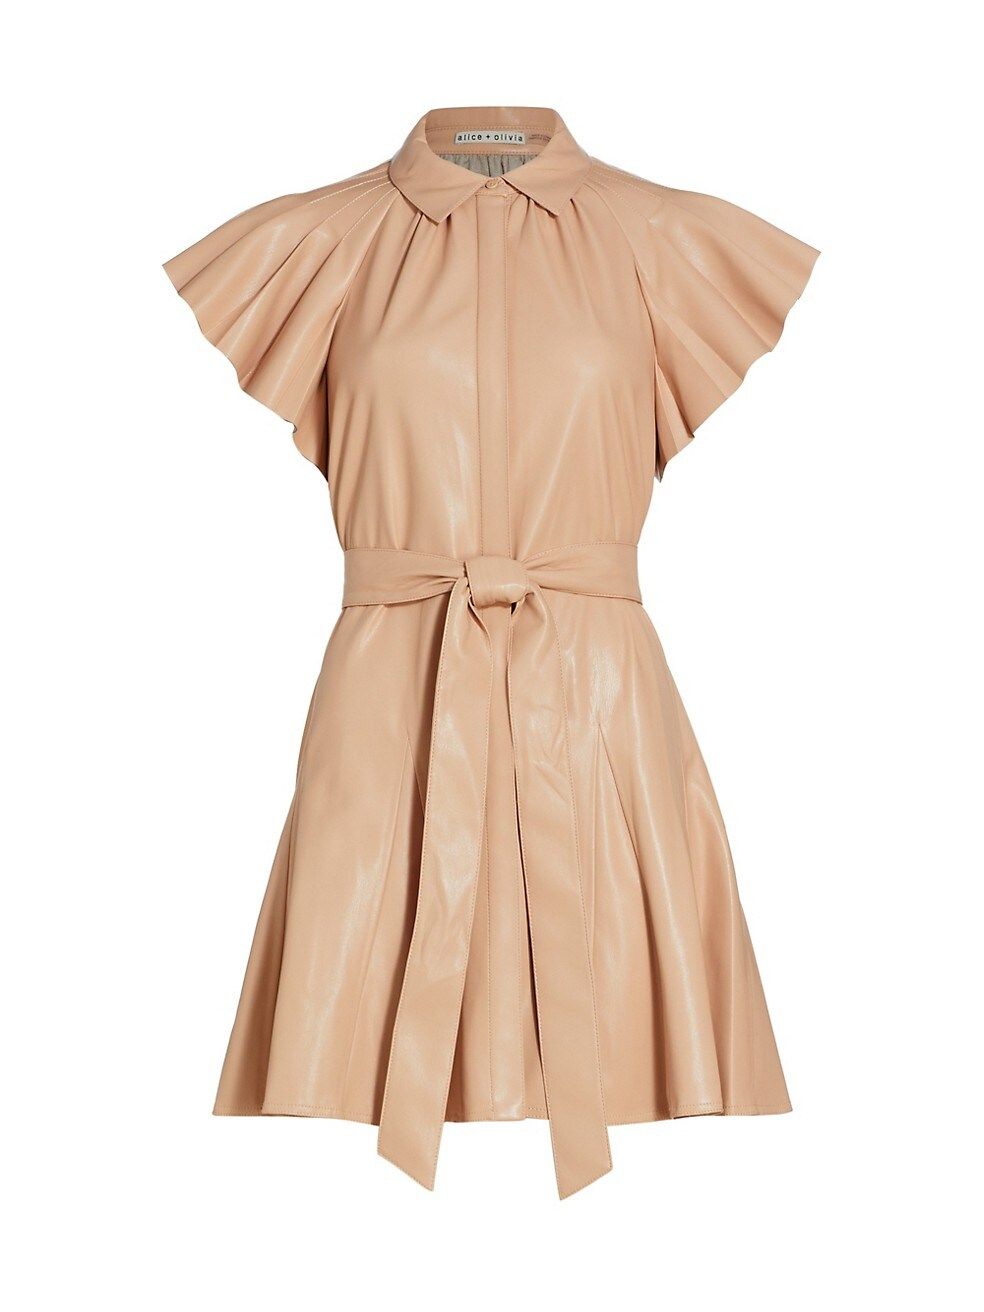 Alice + Olivia McKell Belted Faux Leather Minidress | Saks Fifth Avenue